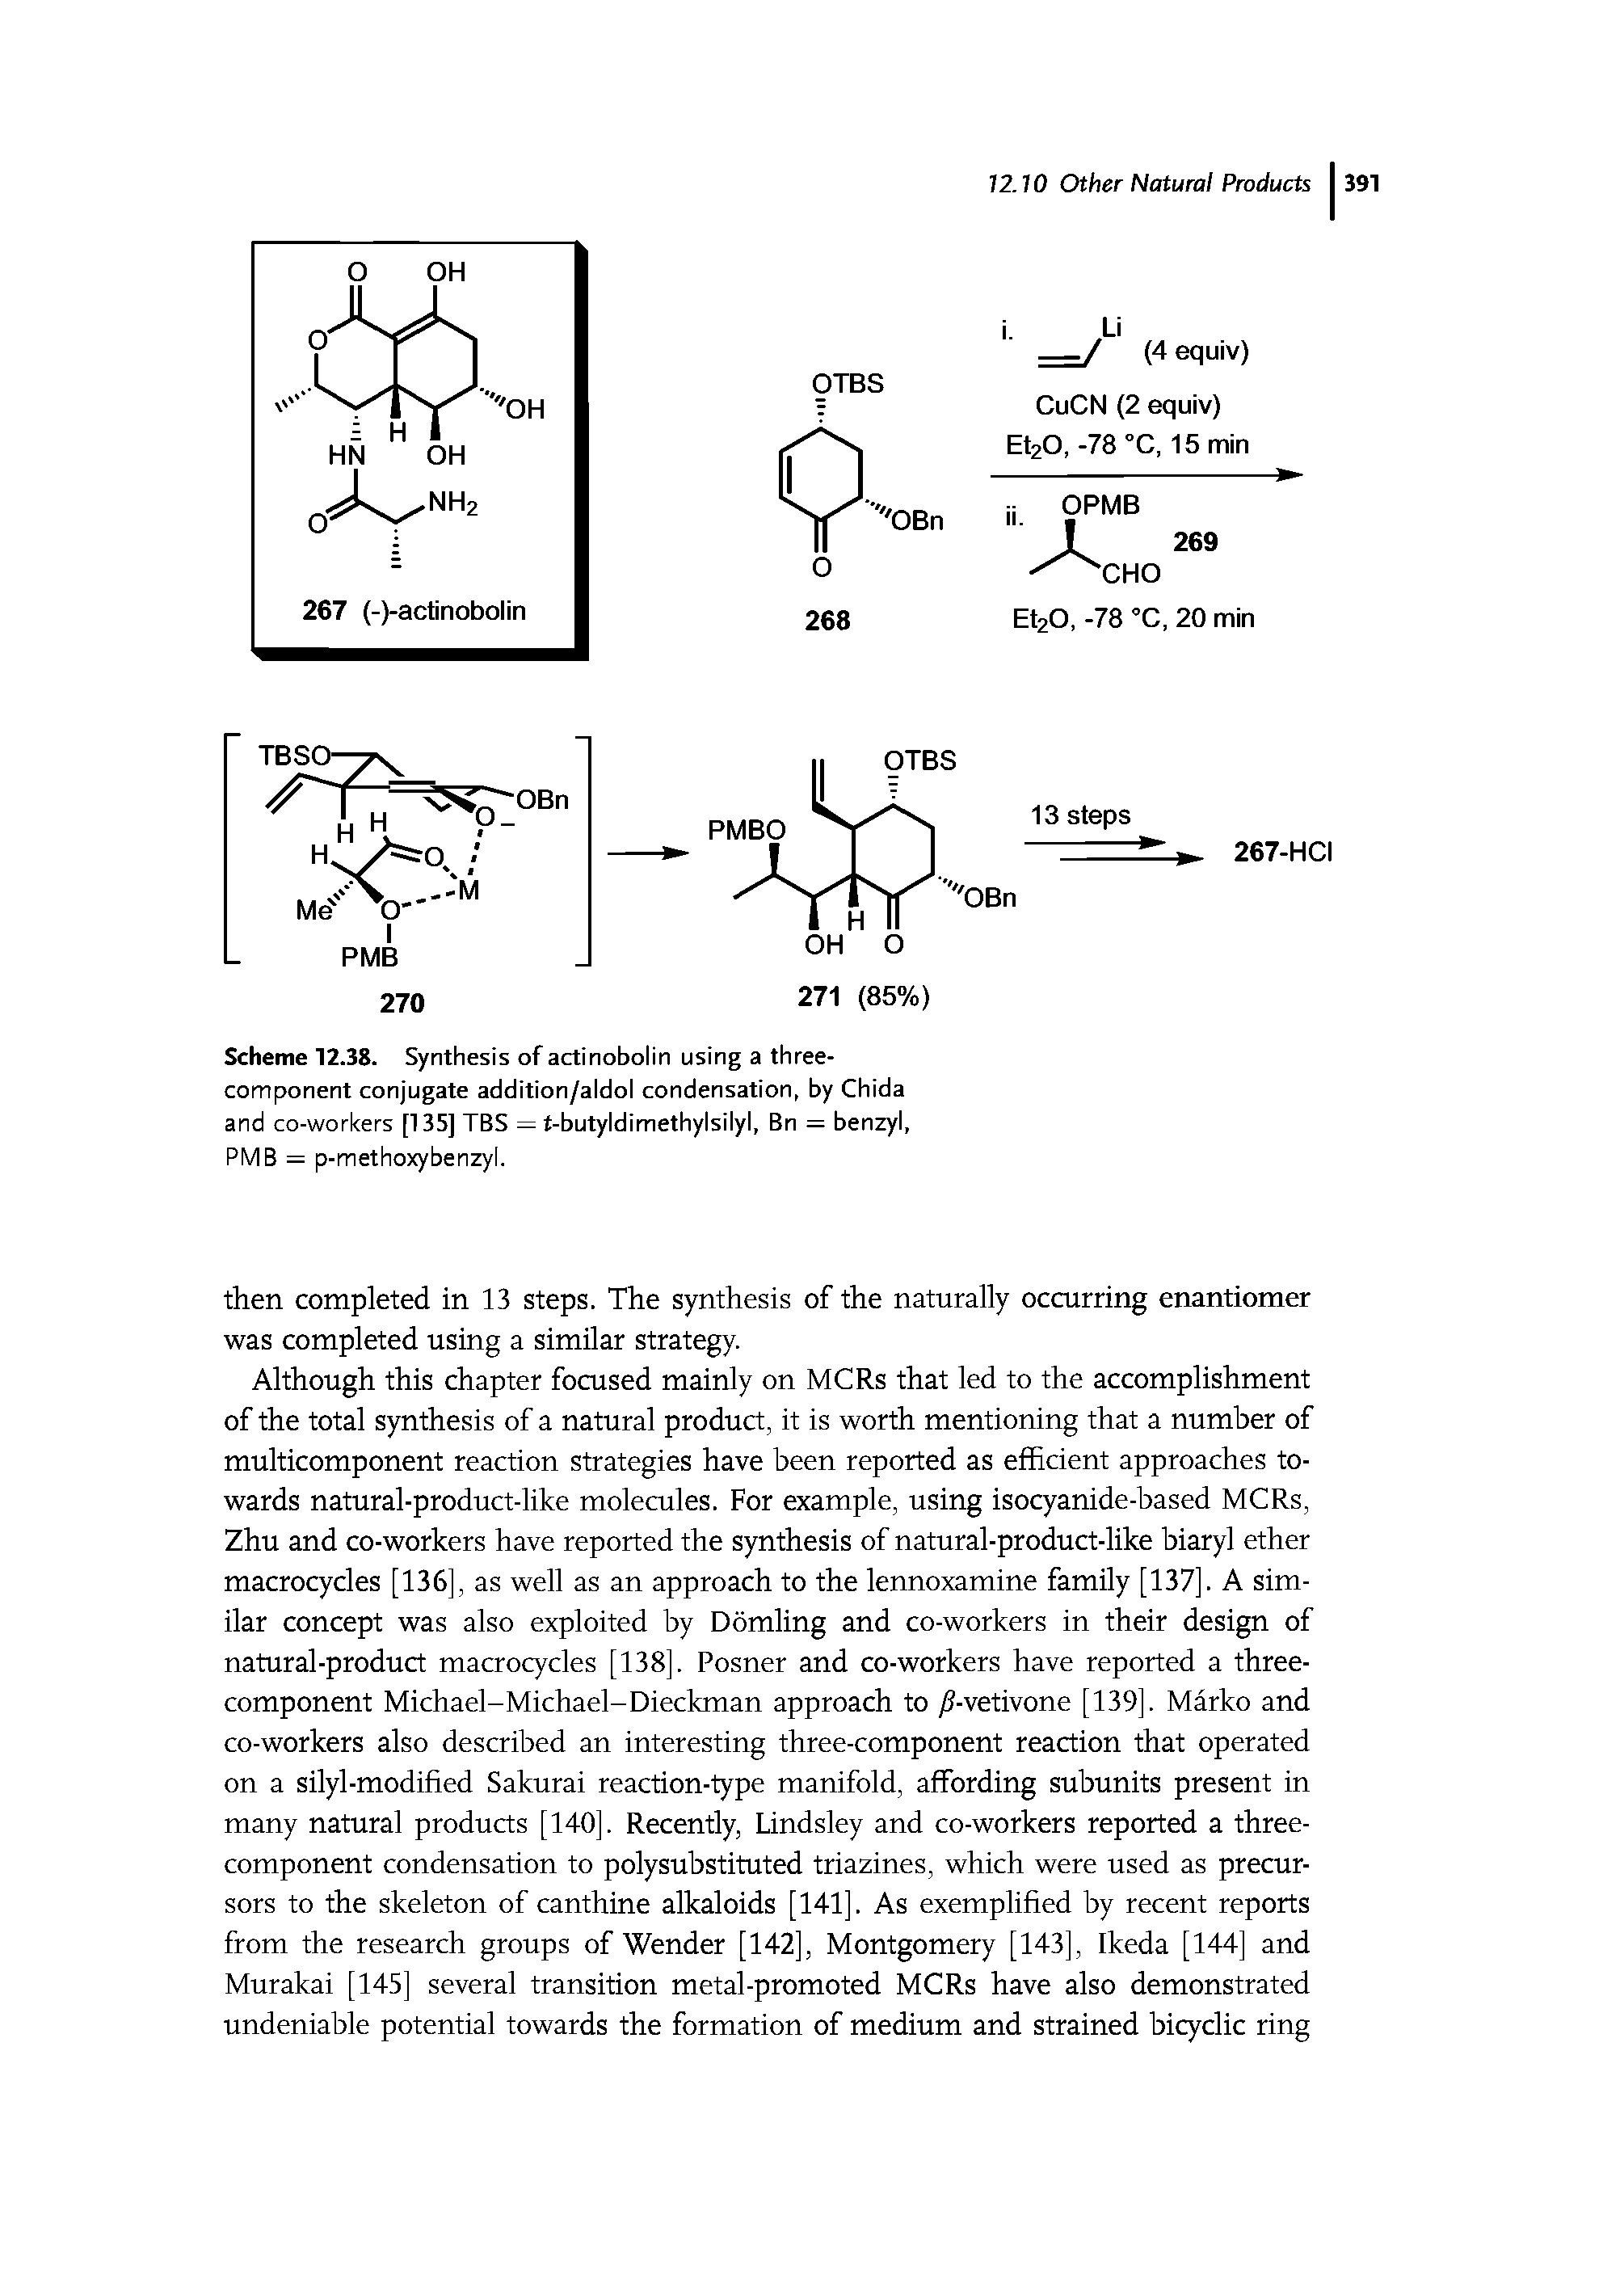 Scheme 12.38. Synthesis of actinobolin using a three-component conjugate addition/aldol condensation, by Chida and co-workers [135] TBS = t-butyldimethylsilyl, Bn = benzyl, PMB = p-methoxybenzyl.